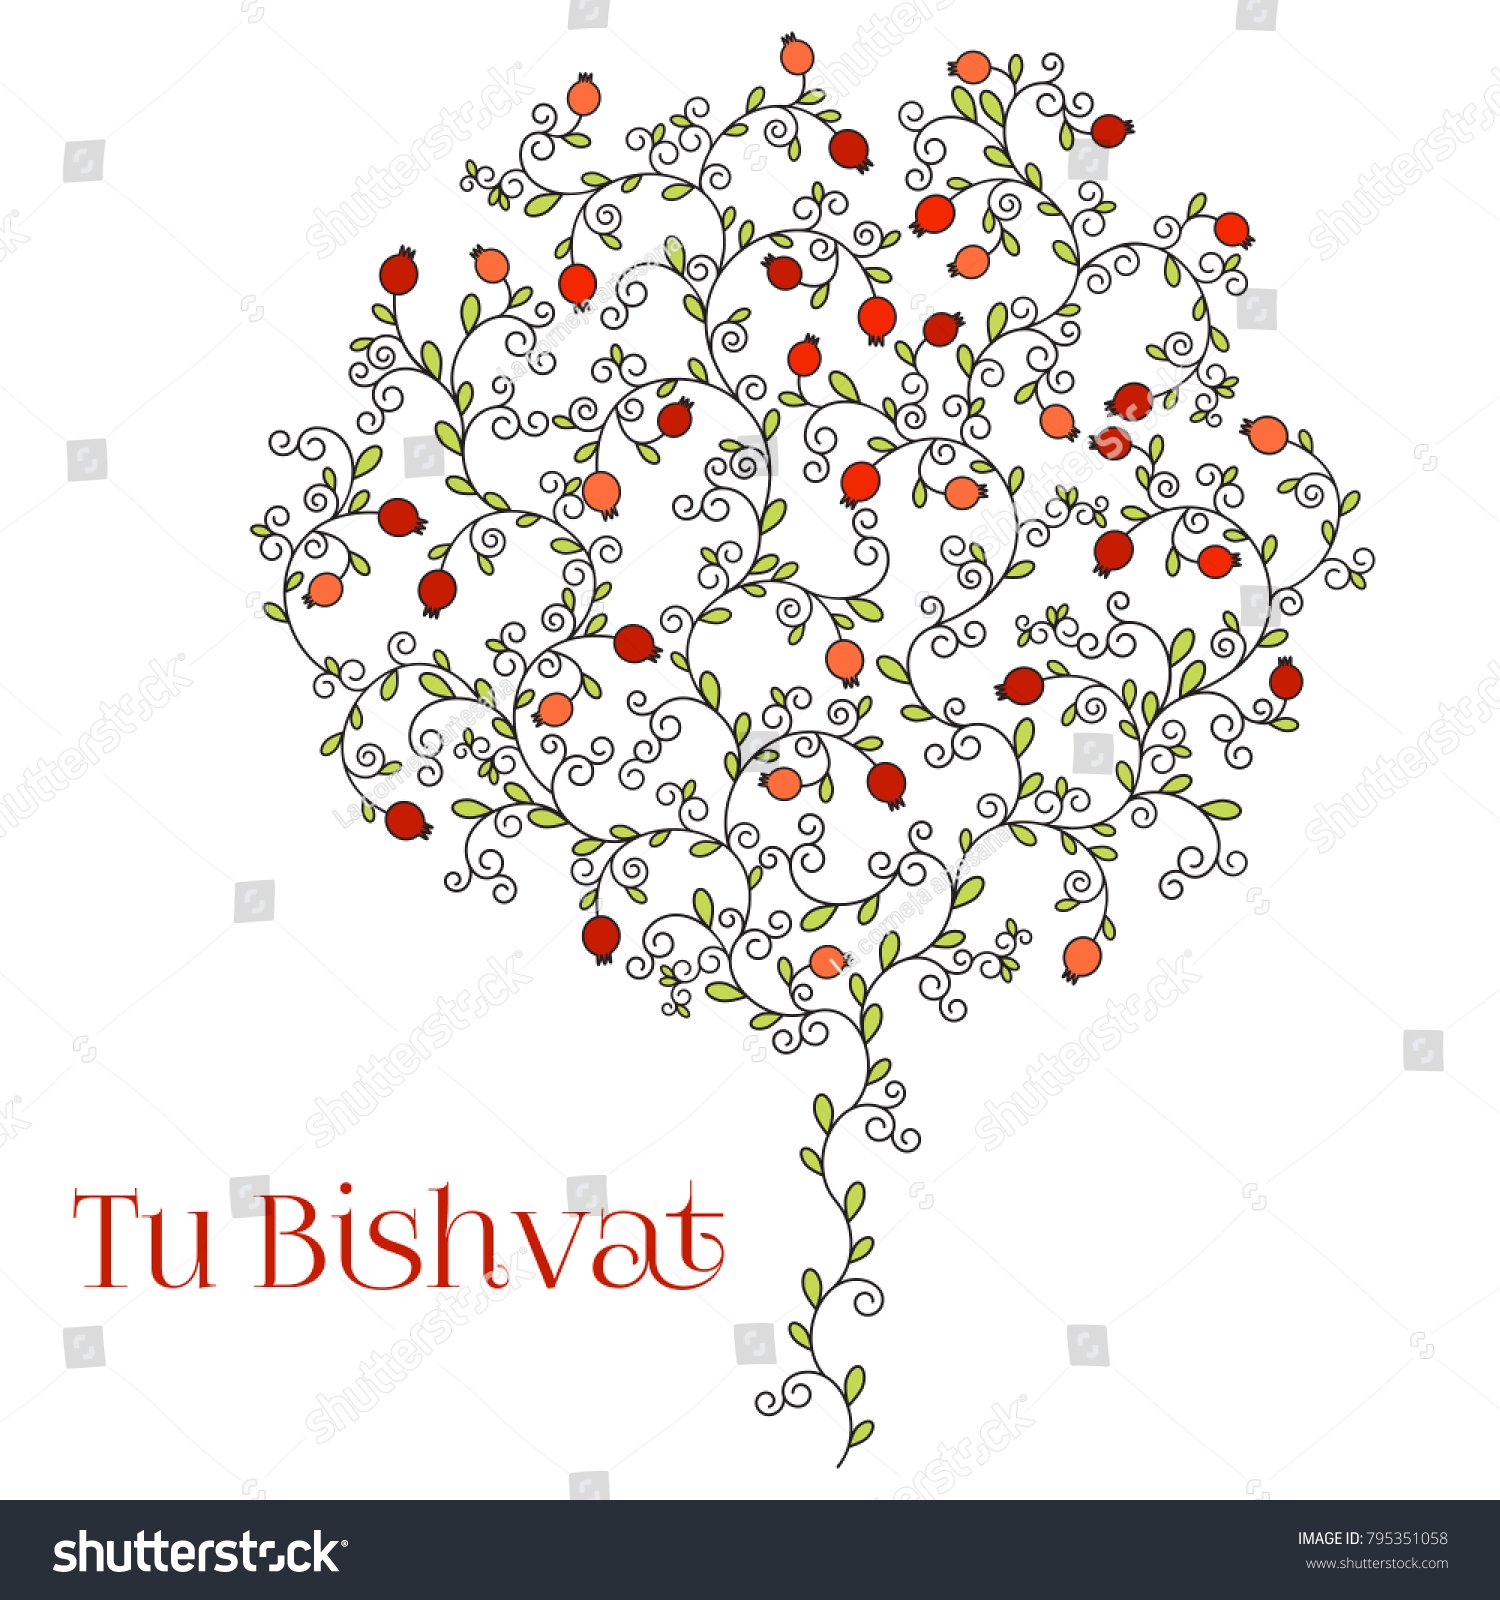 stock-vector-vector-illustration-of-jewish-holiday-new-year-of-trees-for-tu-bishvat-a-tree-with-pomegranate-795351058.jpg